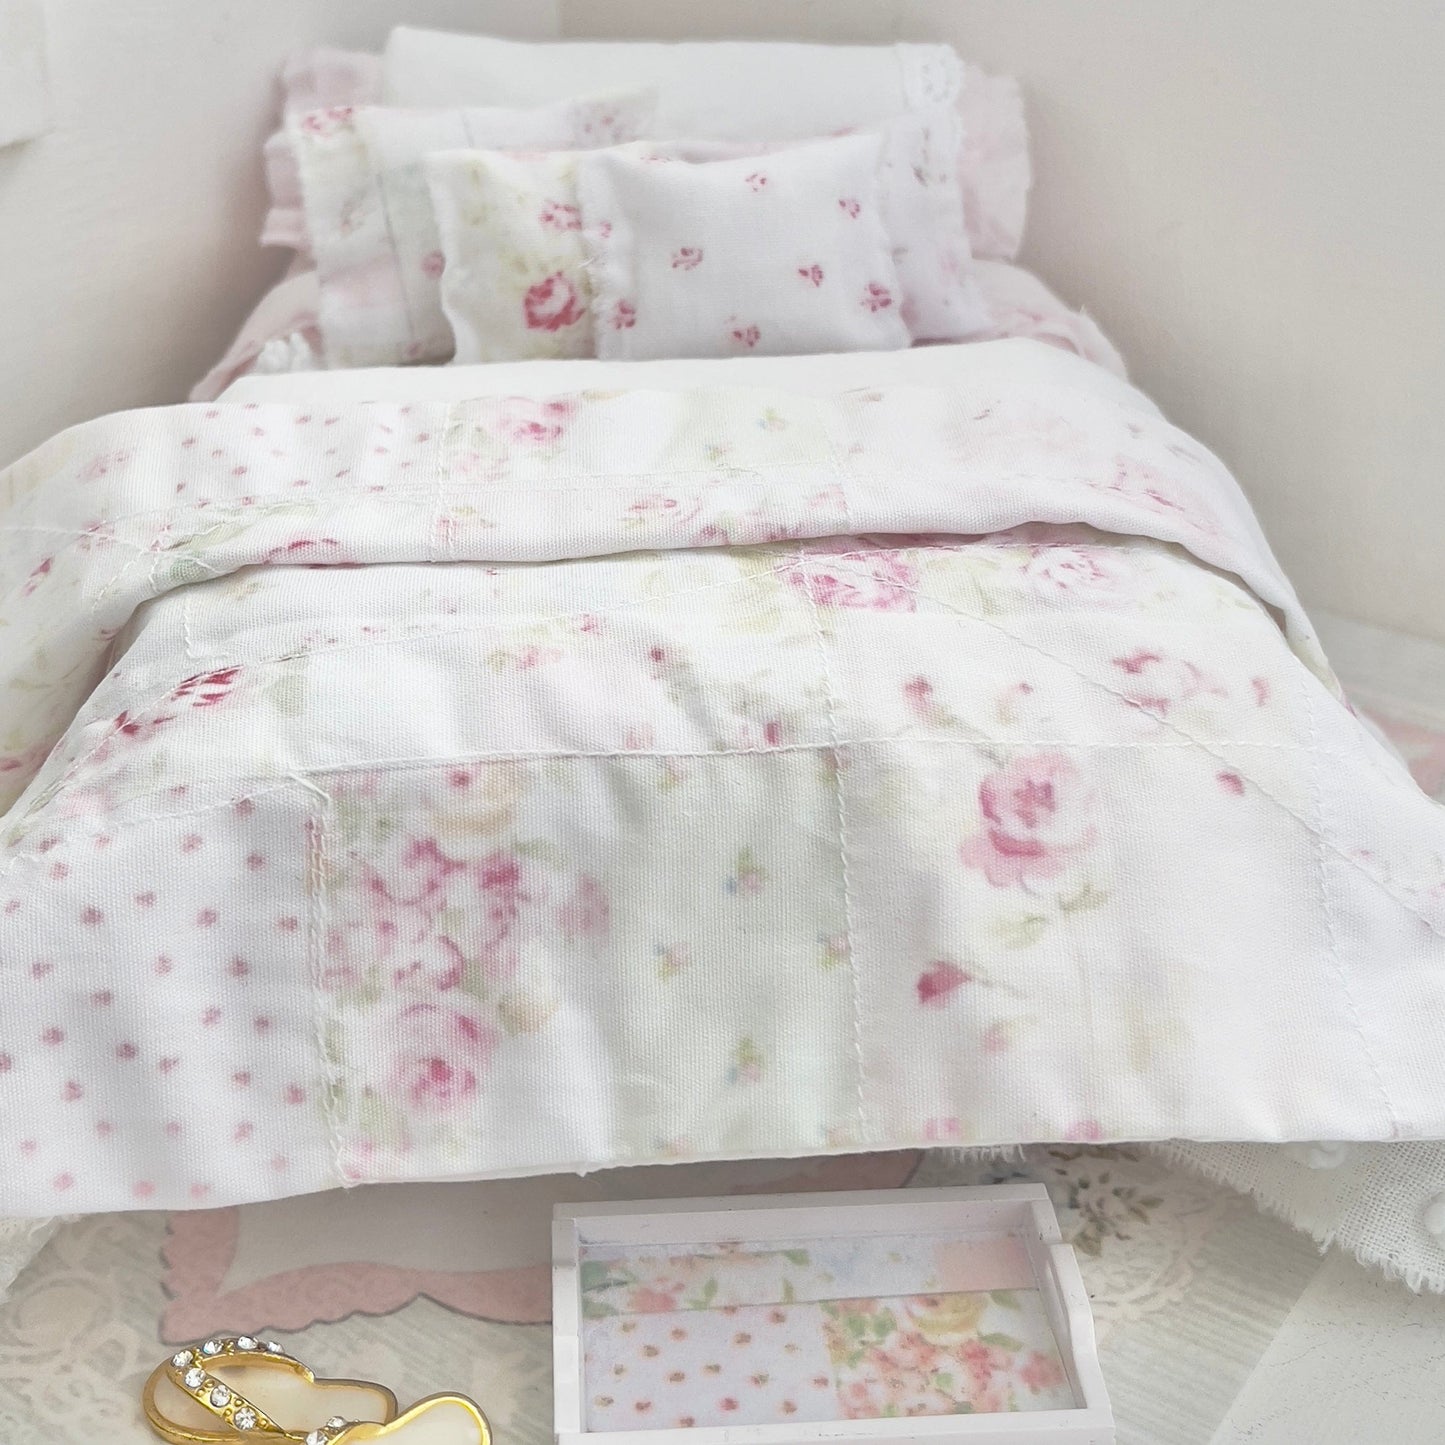 Chantallena Doll House Dressed 1:12 Scale Bed | Pink Wooden Cot with Pink Cotton Bedding Set | June